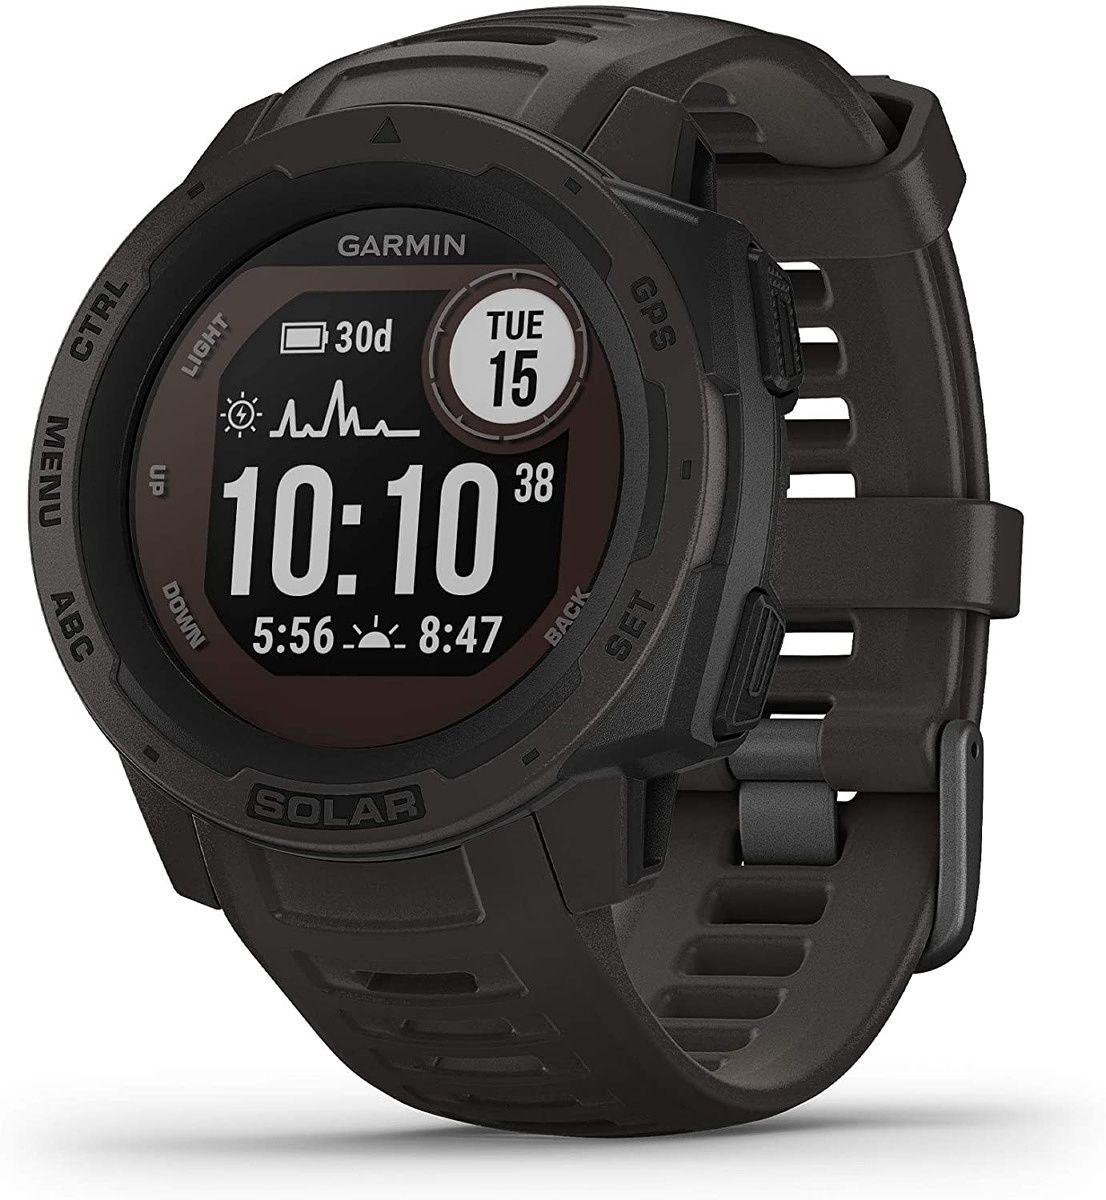 The Garmin Instinct Solar is probably not as nearly full featured as some of the most expensive watches, but it's still rugged and comes with a fairly decent feature set.